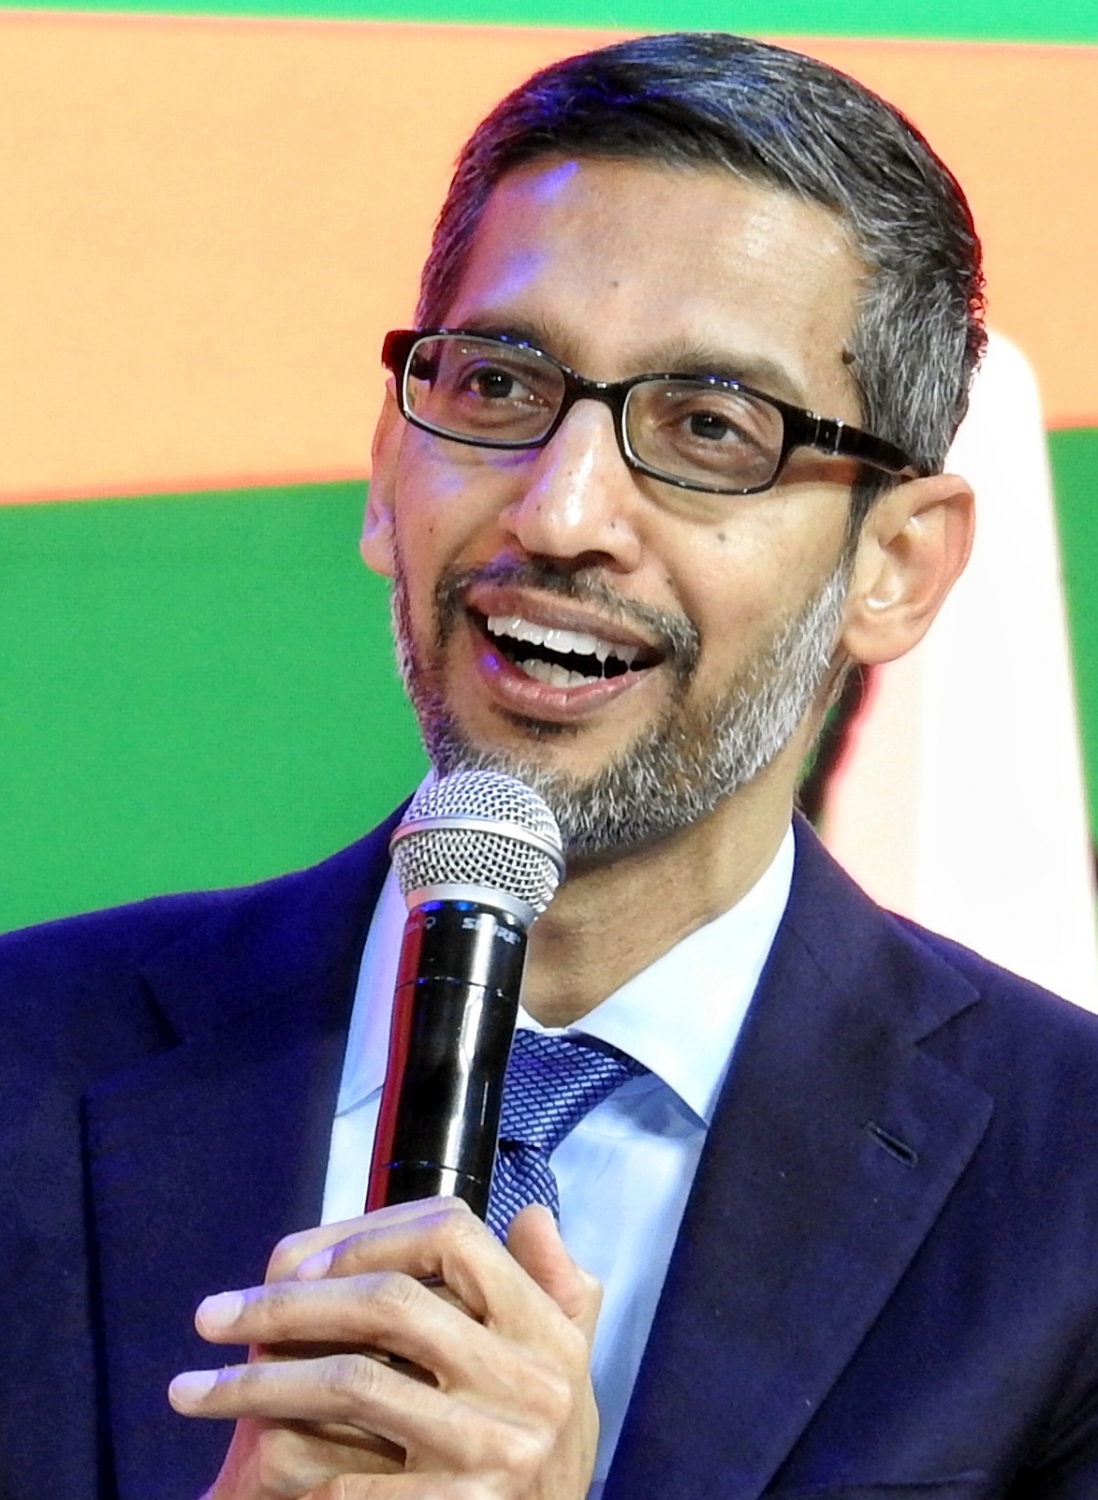 Sundar Pichai defends Google business practices, says our products are good for internet